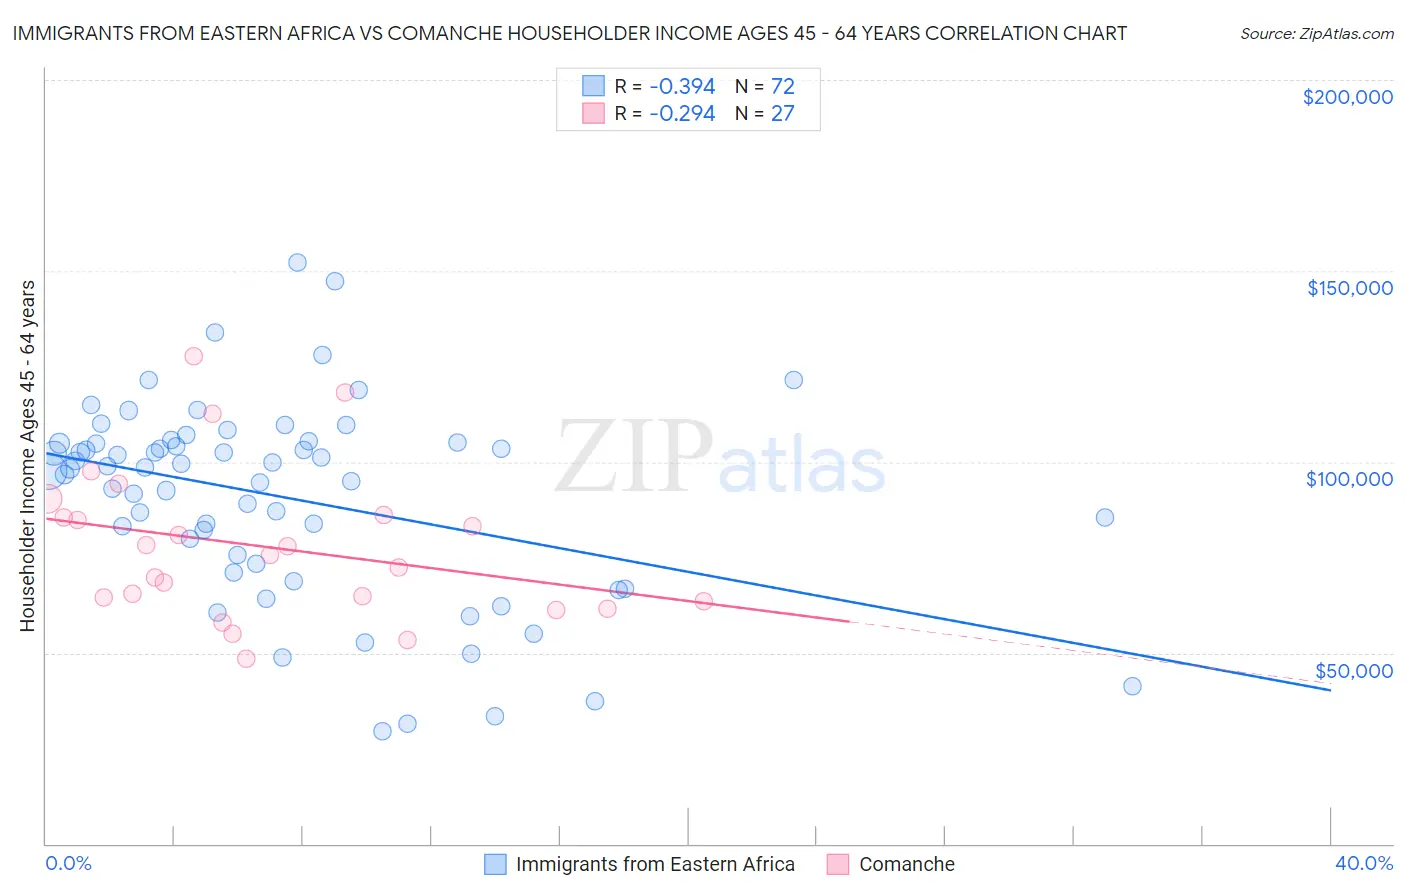 Immigrants from Eastern Africa vs Comanche Householder Income Ages 45 - 64 years